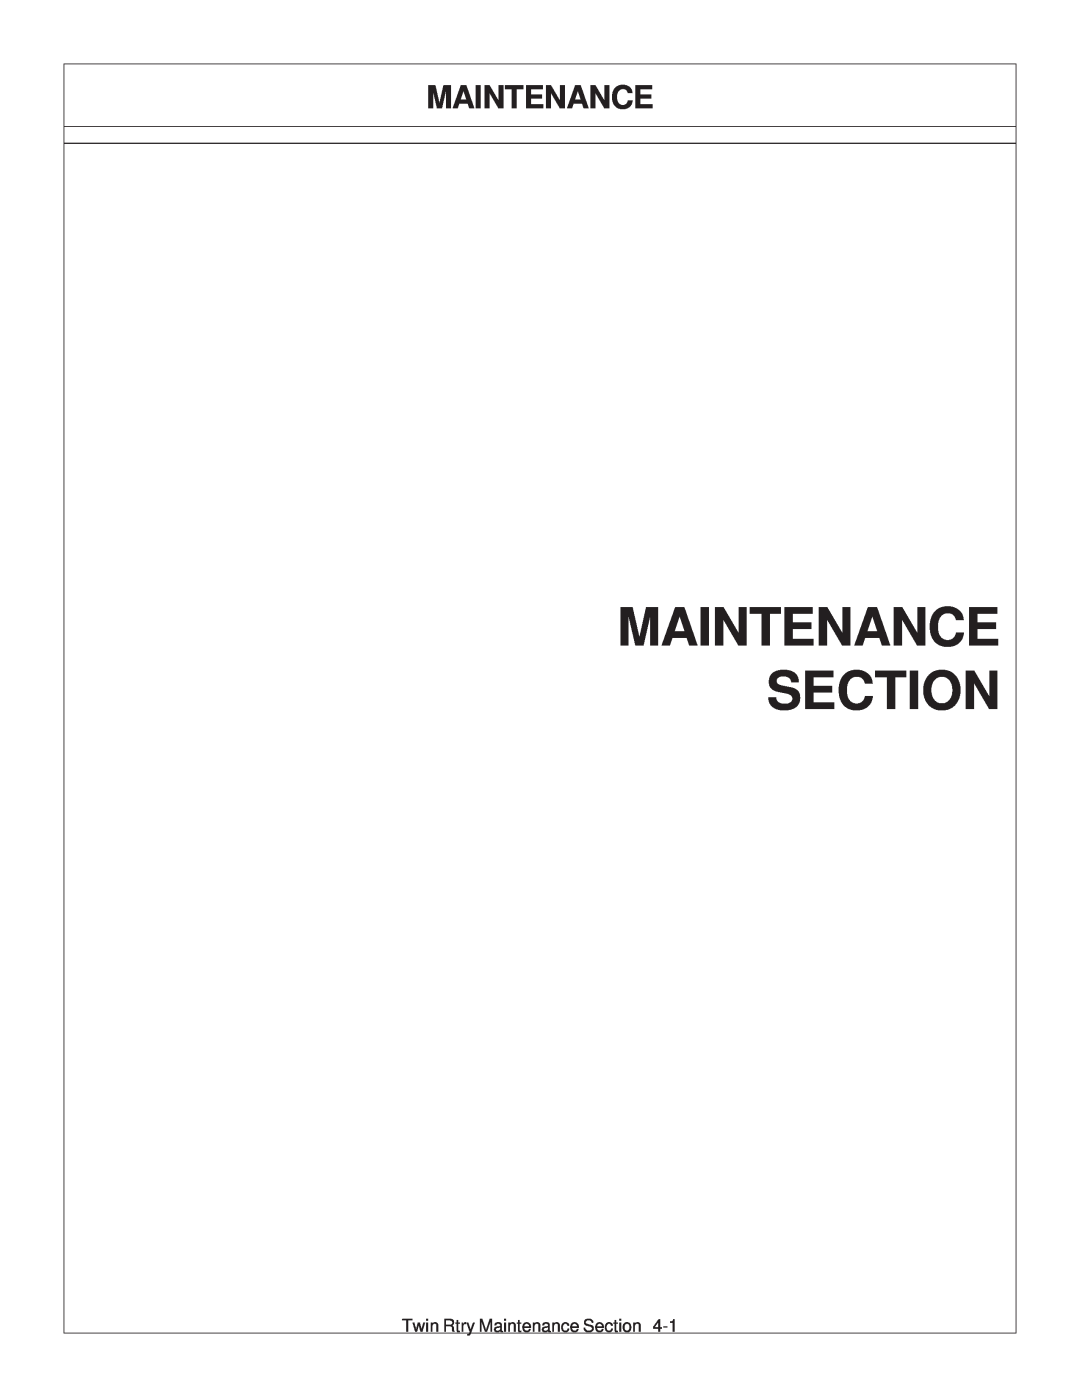 Tiger Products Co., Ltd 6020009 manual Maintenance Section 